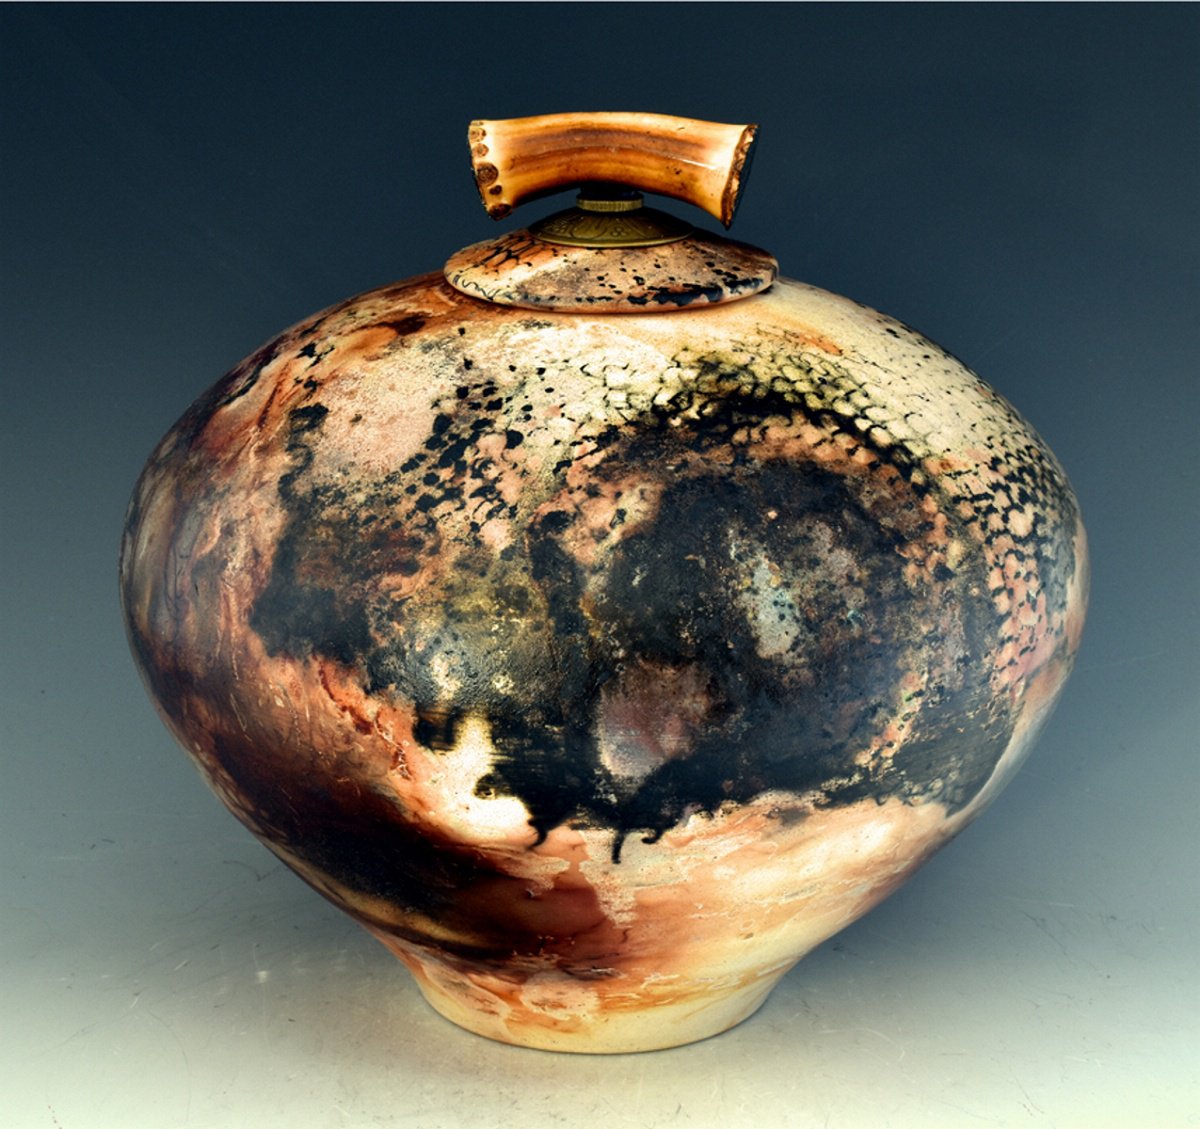 B175 sagger fired stoneware vessel by Ron Mello